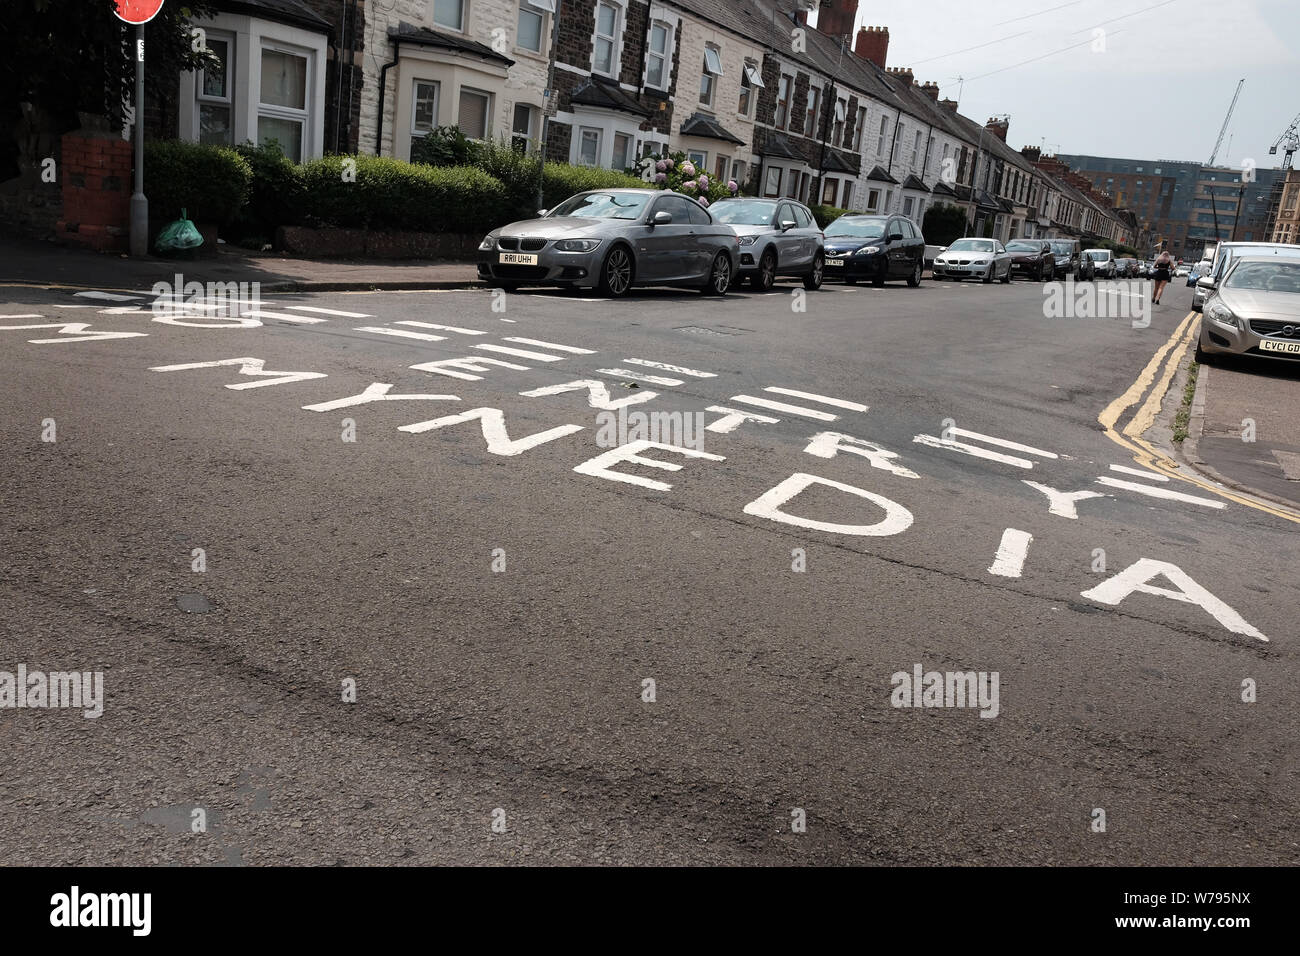 July 2019 - No entry in Welsh language on the road of a street in Cardiff, Wales, UK. Stock Photo